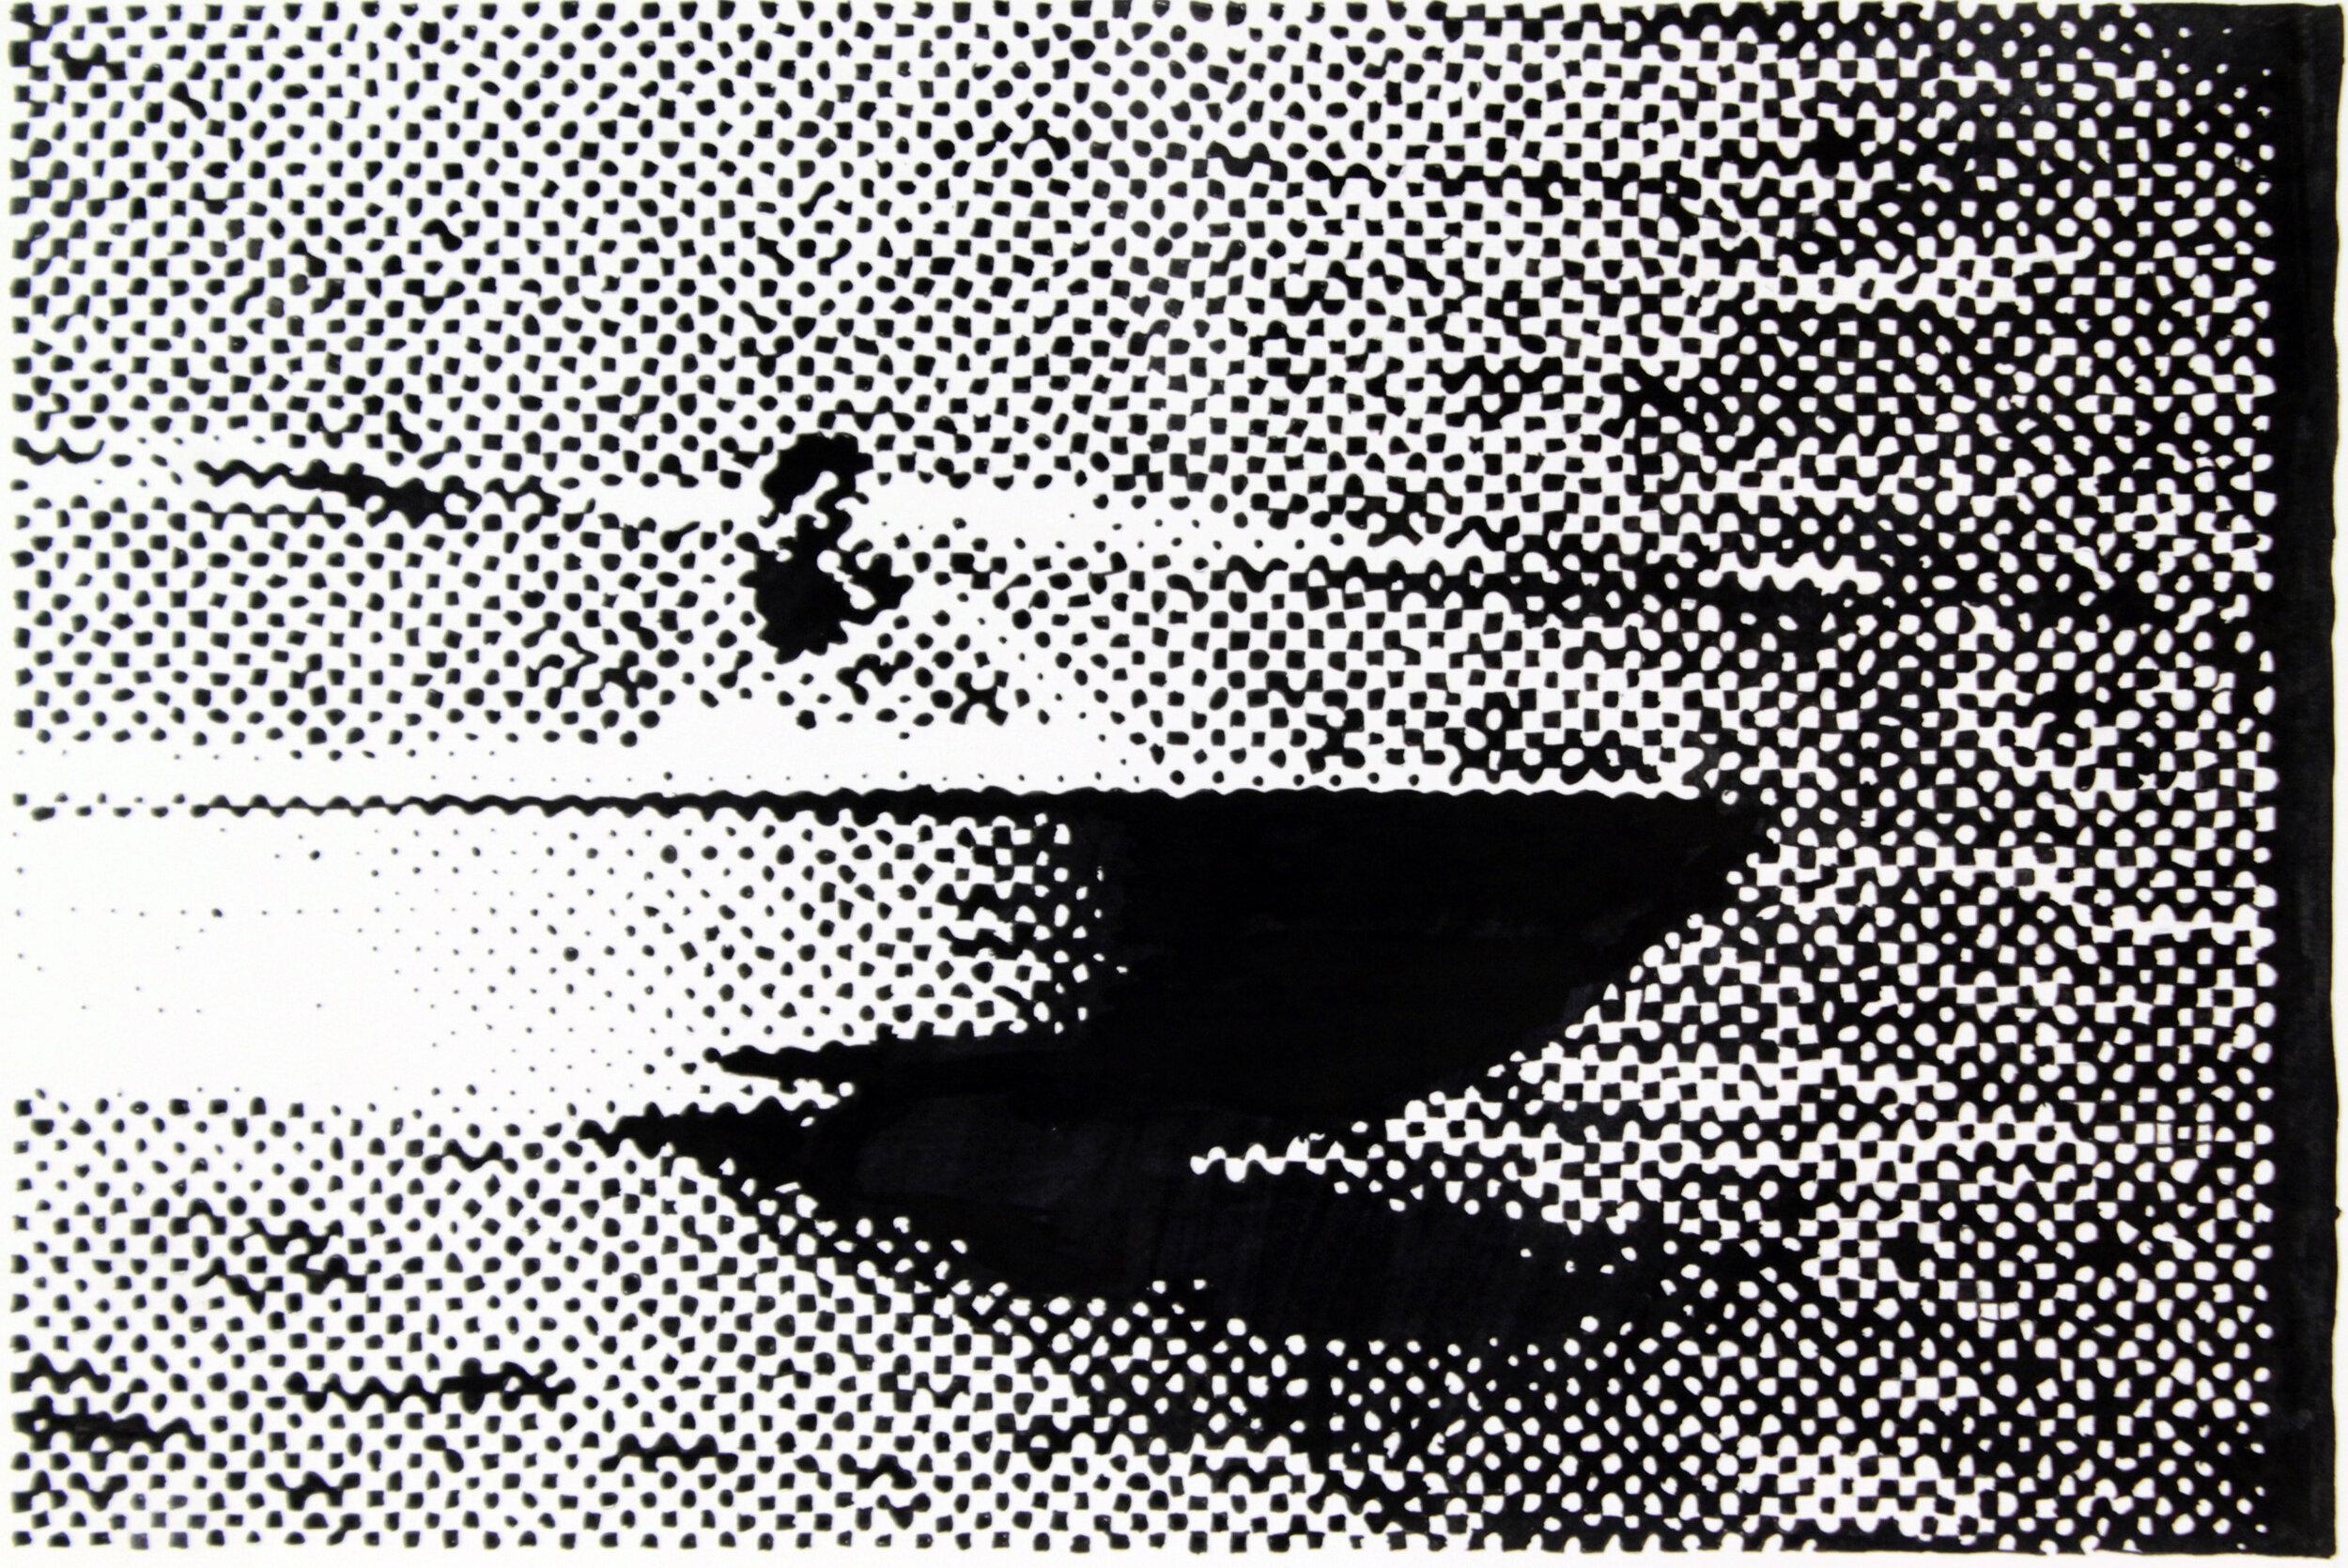 Charles Buckley Portrait - Speed Boat, black and white work on paper, woman driving boat, dots